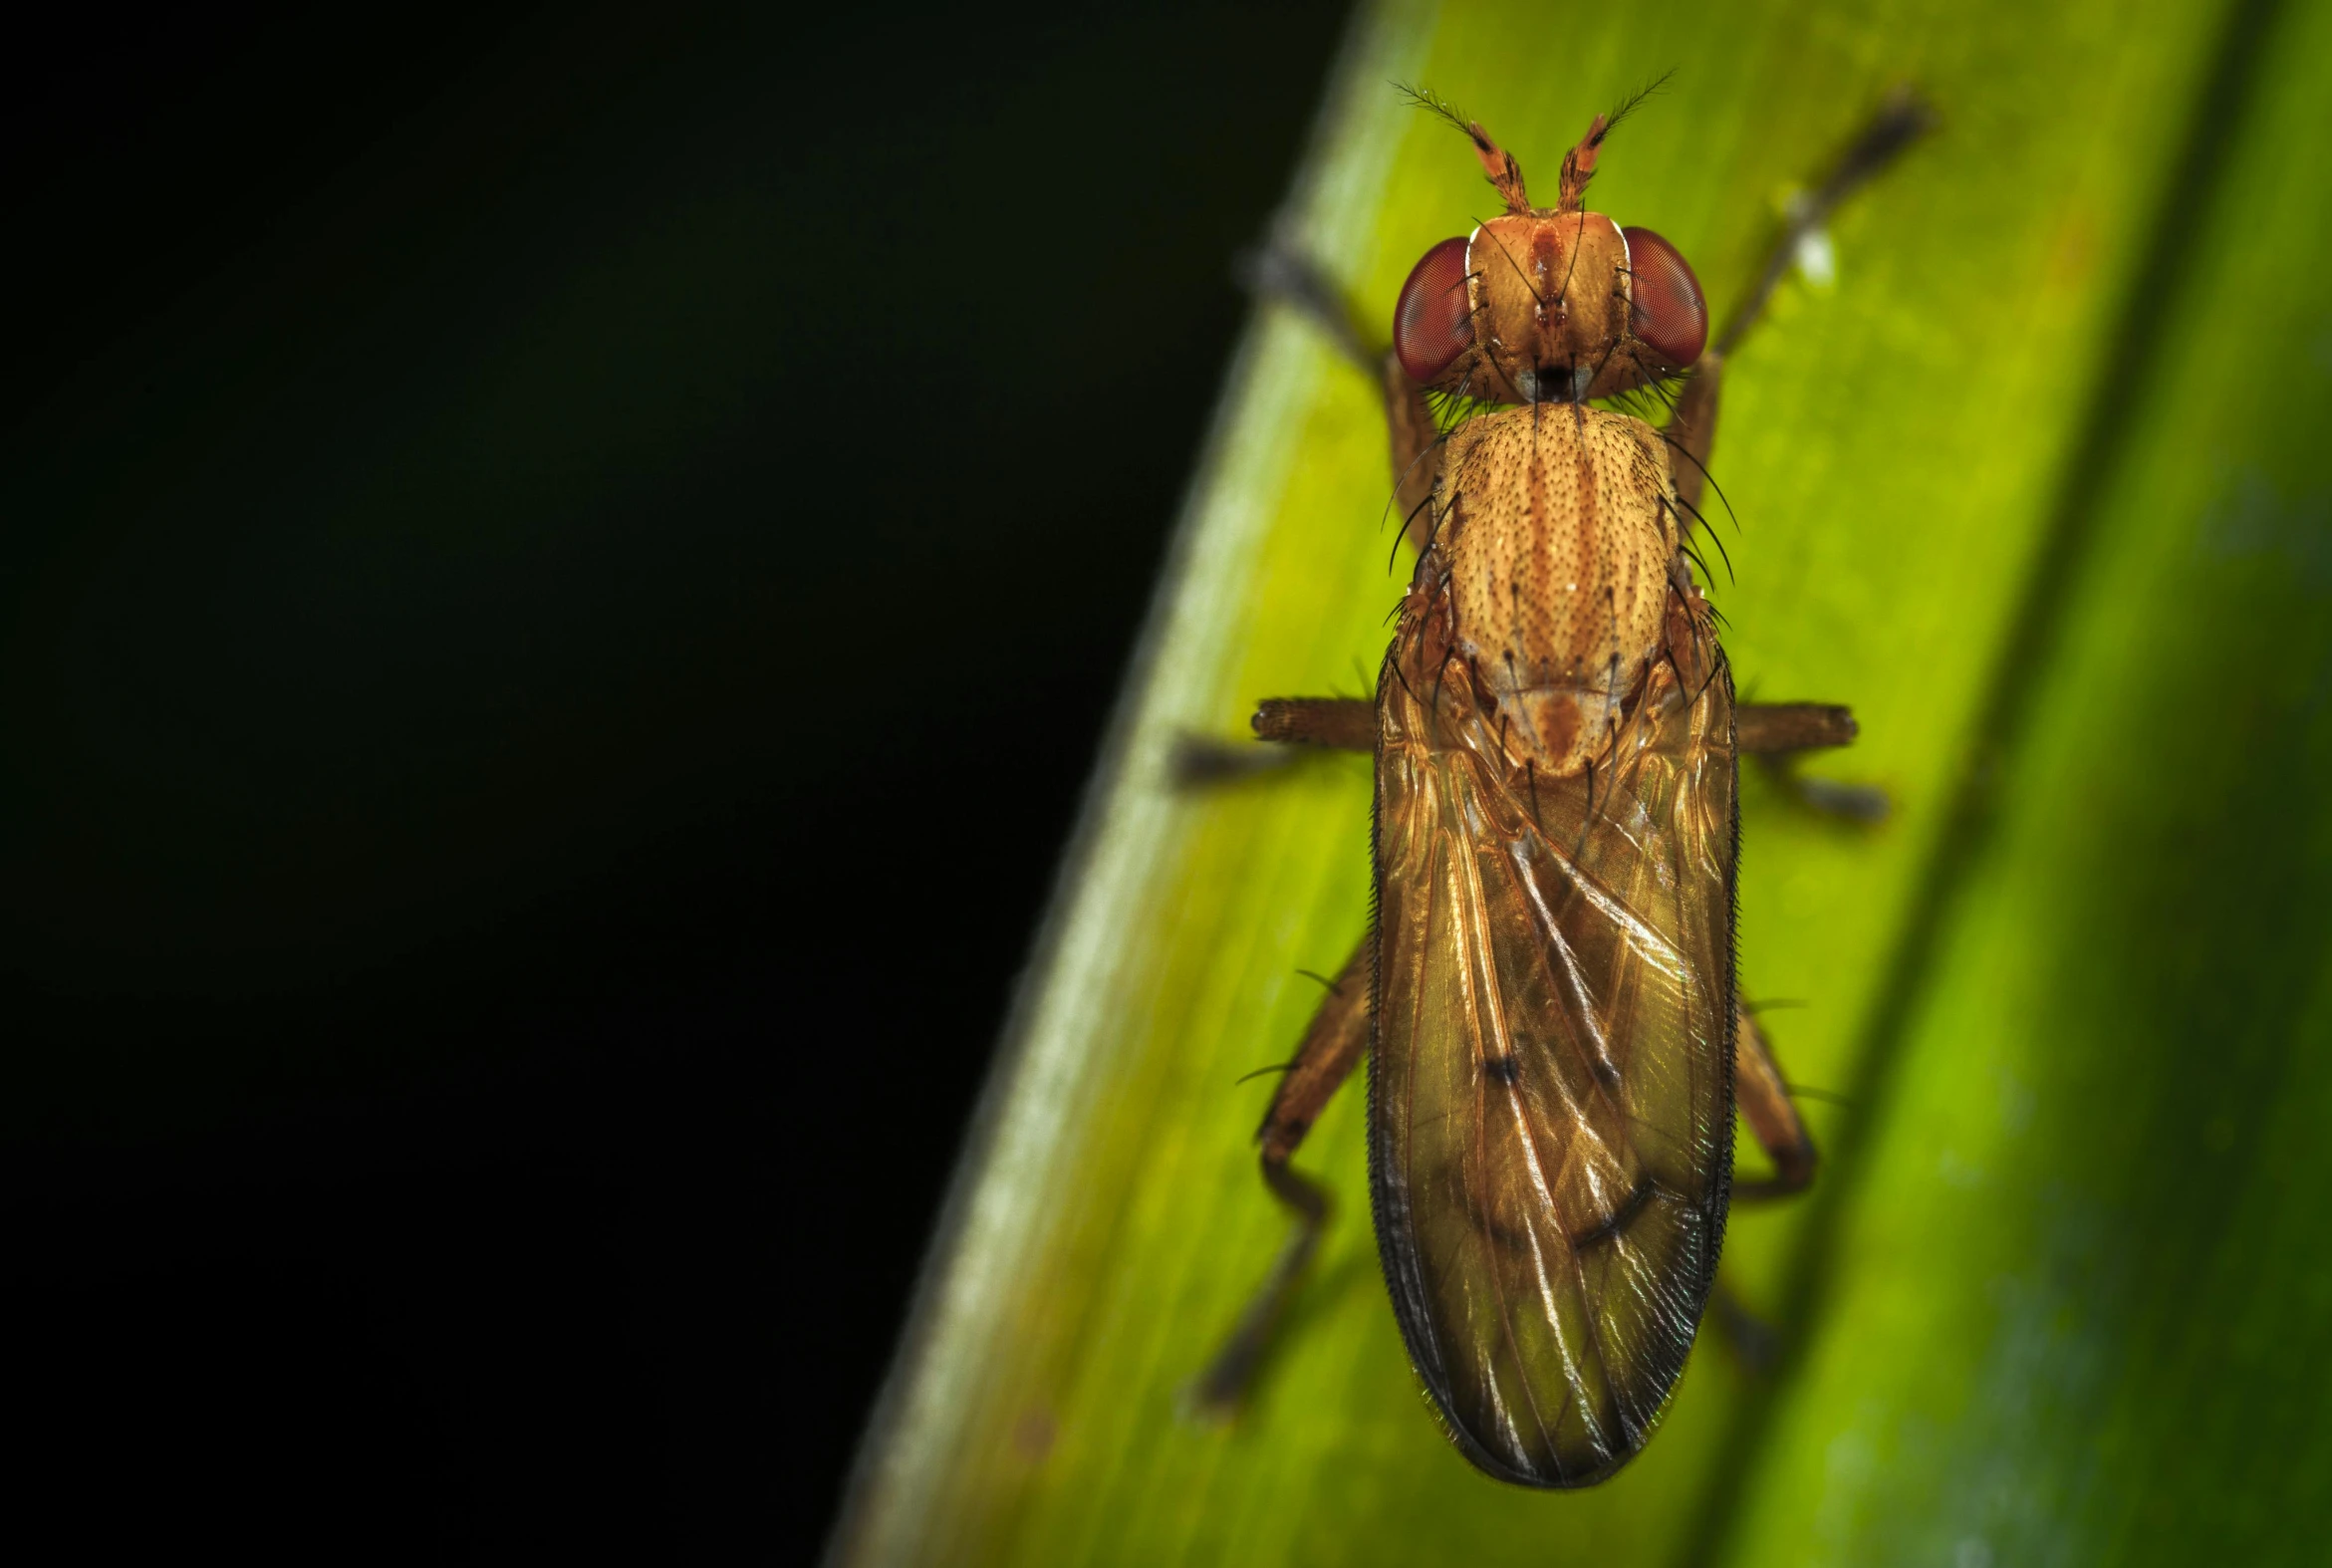 a close up of a fly on a leaf, a macro photograph, pexels contest winner, hurufiyya, avatar image, malt, at night, brown